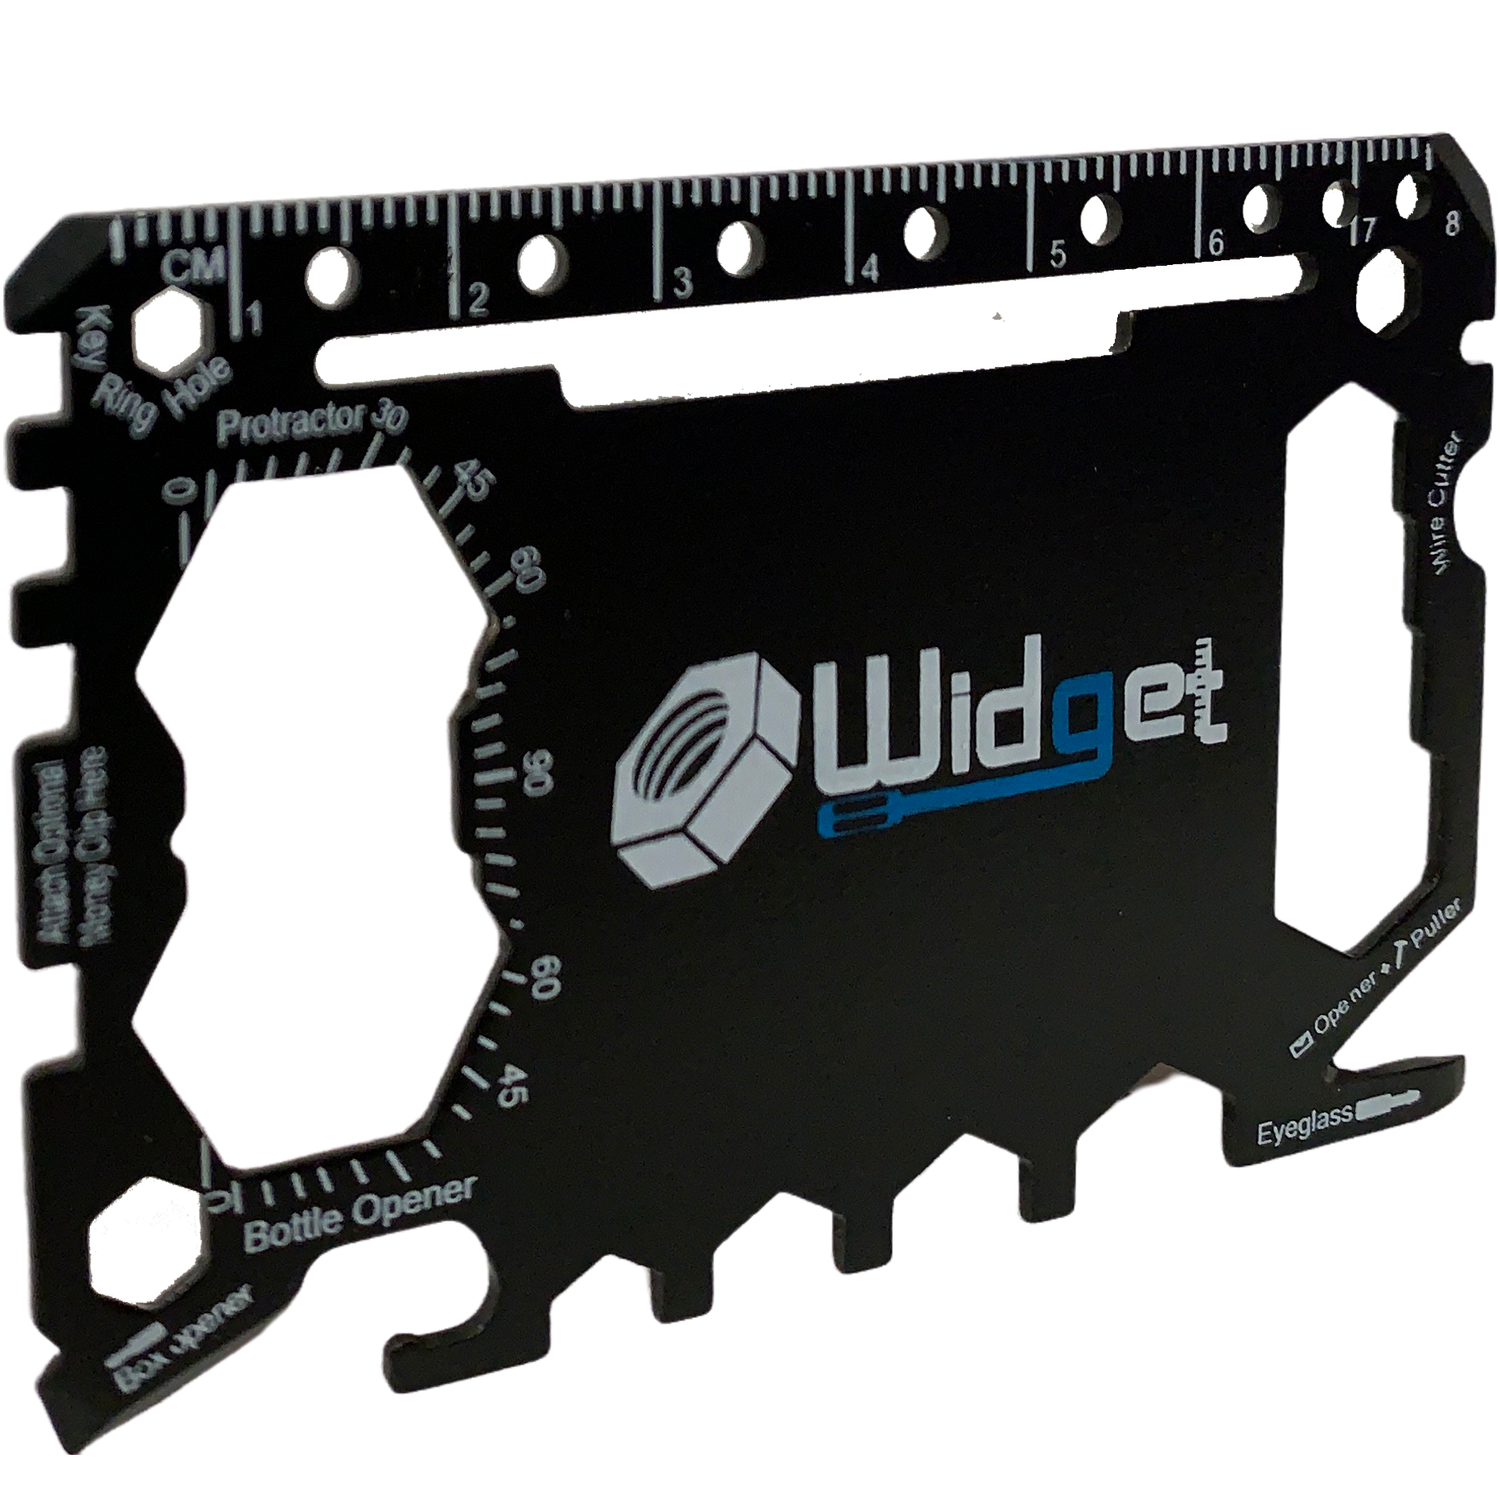 The WIDGET 43-in-1 Wallet Multi-Tool is more than meets the eye! with 43+ mini tools, you will never be left unprepared. Watch this video to see all of the tools in action! The WIDGET includes tools such as: 3x Screw Drivers ( Phillip & Flatehead), Box Cutter/ Blade, Bottle Opener, 2x Ruler (cm/in), Can Opener, Cell Phone Mount, Nail Puller, Eye Glasses Screw Driver, M2 Hex Wrench, 4x Open Hex Wrench (M3,M4,M5,M6), 4x Closed Hex Wrench (7/16, 3/8, 11/32, 5/16), M1.6 Hex Wrench, Butterfly Wrench, 4x Spoke Keys (.127, .130, .136, .156), 9/16" Hex Wrench, Protractor, 15mm Hex Wrench, M2.5 Hex Wrench, 8x Dividers (D1cm-12cm), Key Ring hole, *Money clip (*Money Clip version only) and more